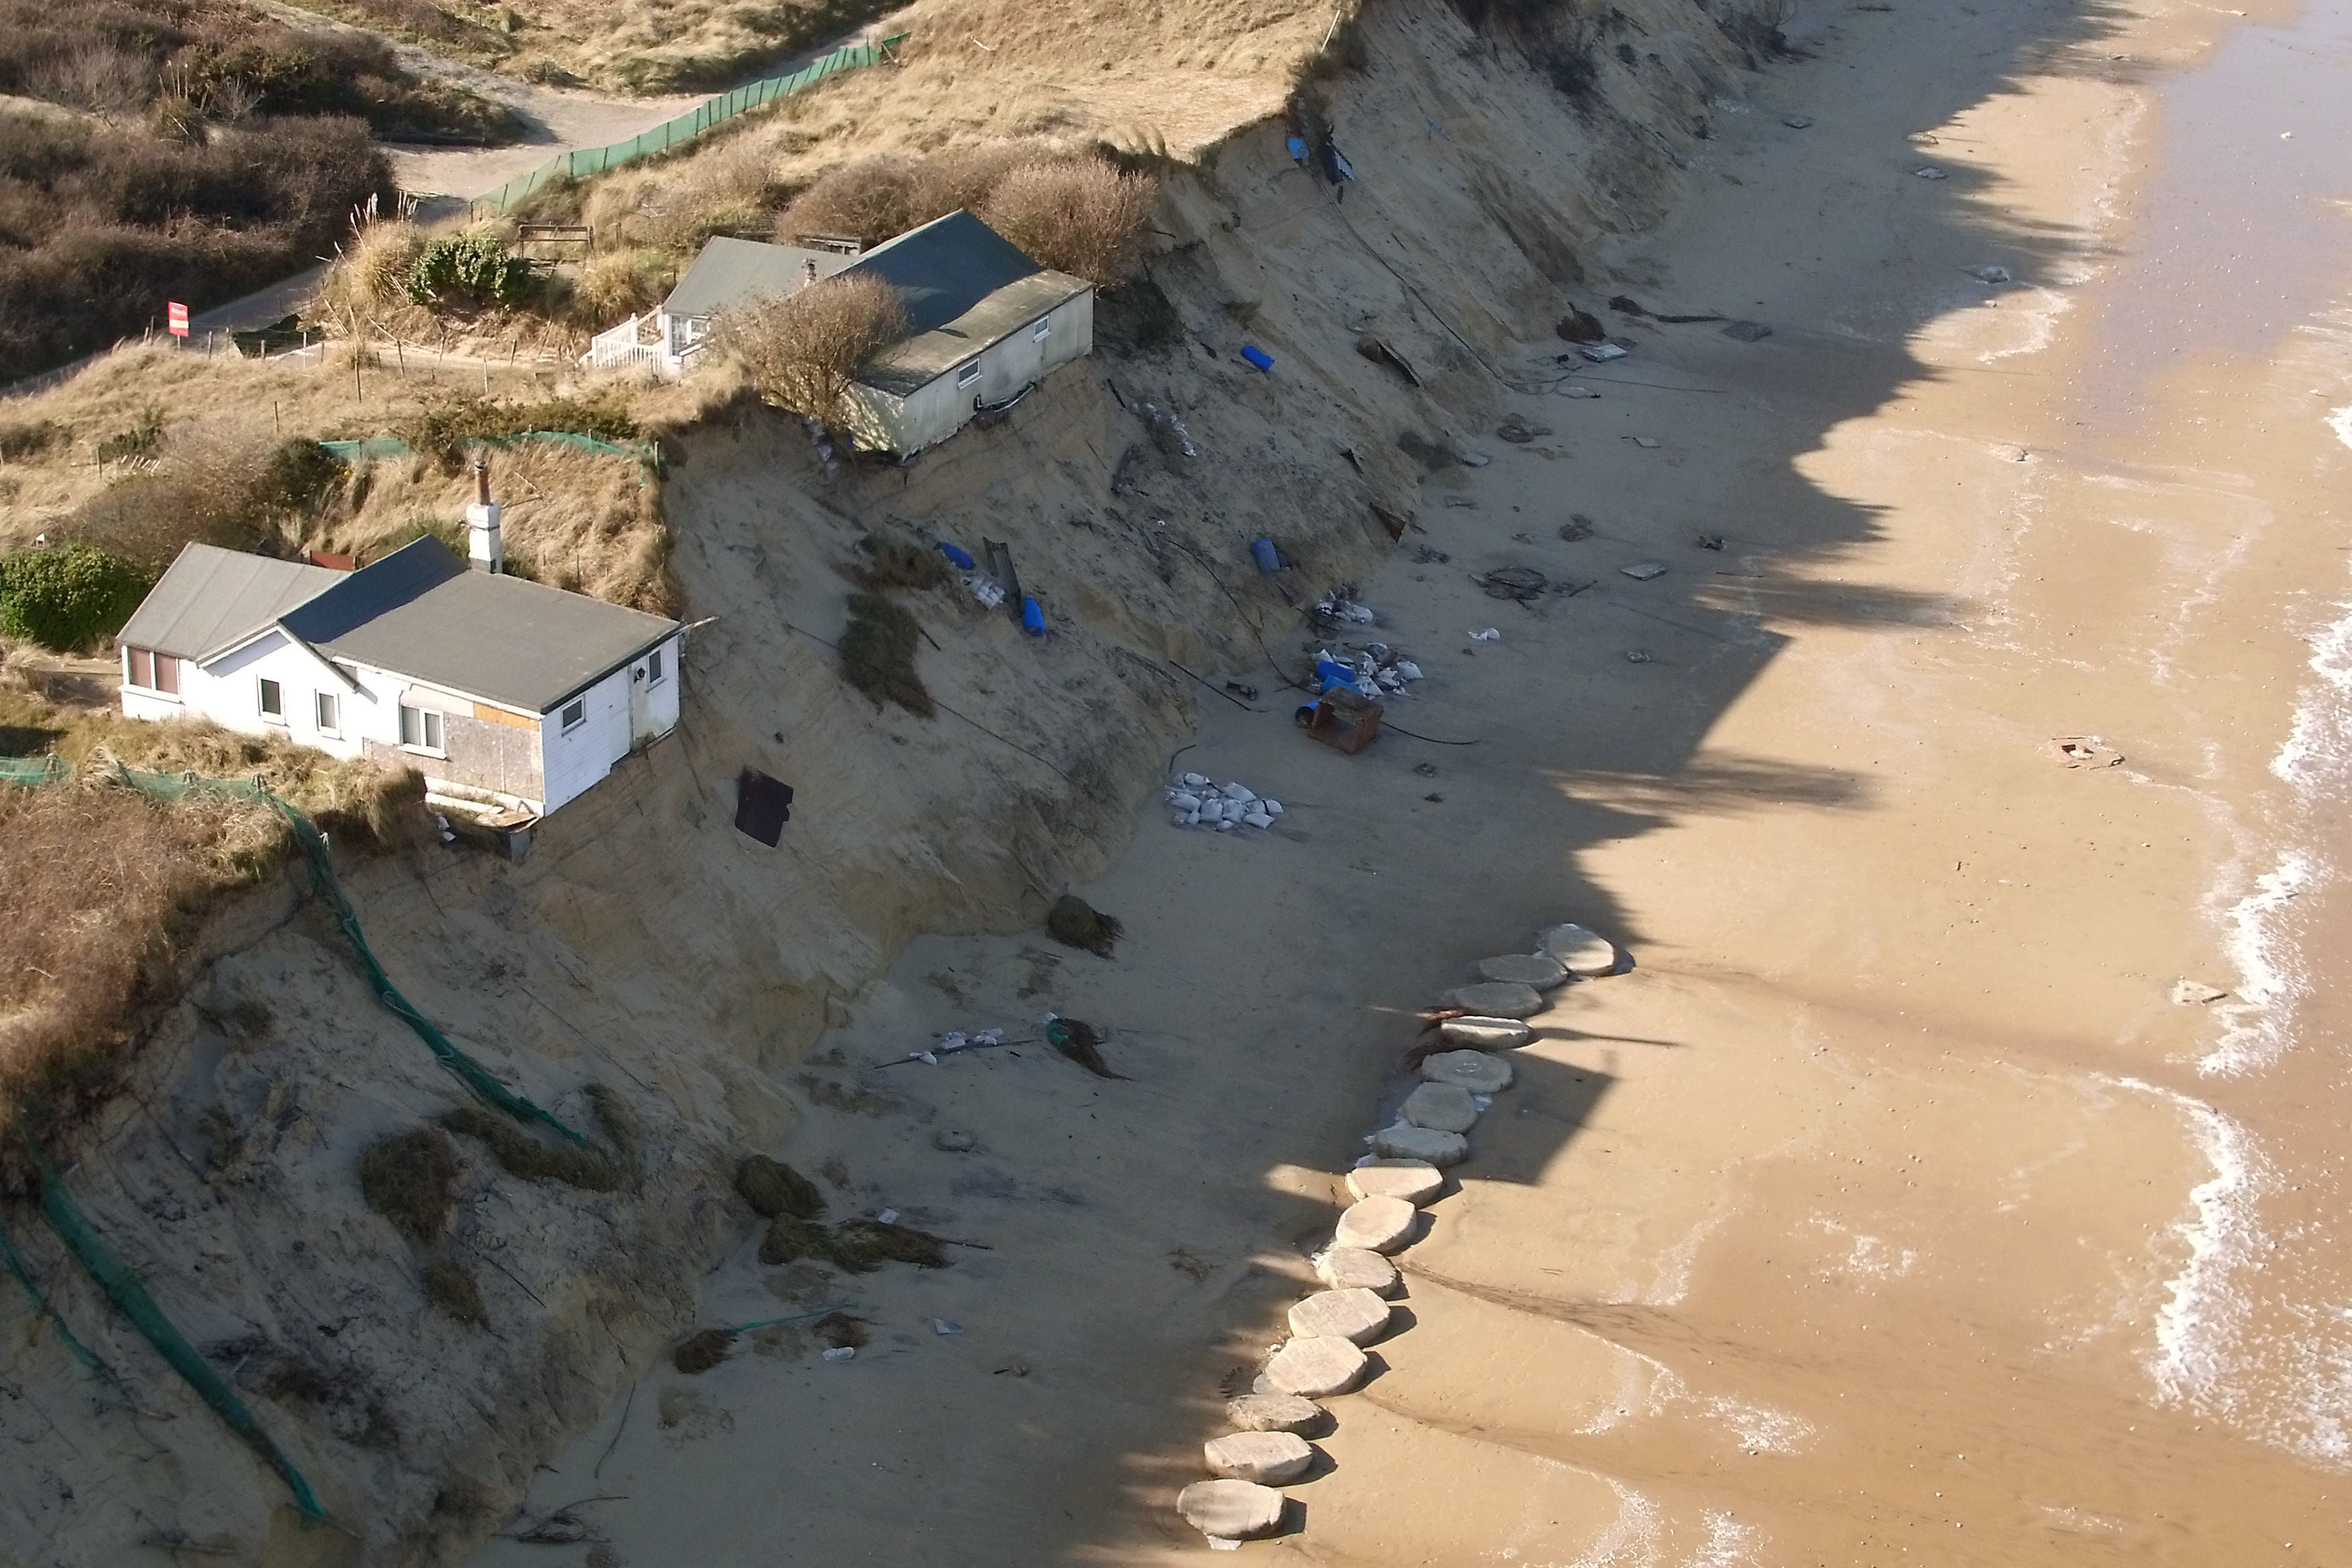 Houses sit on the cliff edge on The Marrams in Hemsby, Norfolk where parts of the cliff have collapsed into the sea